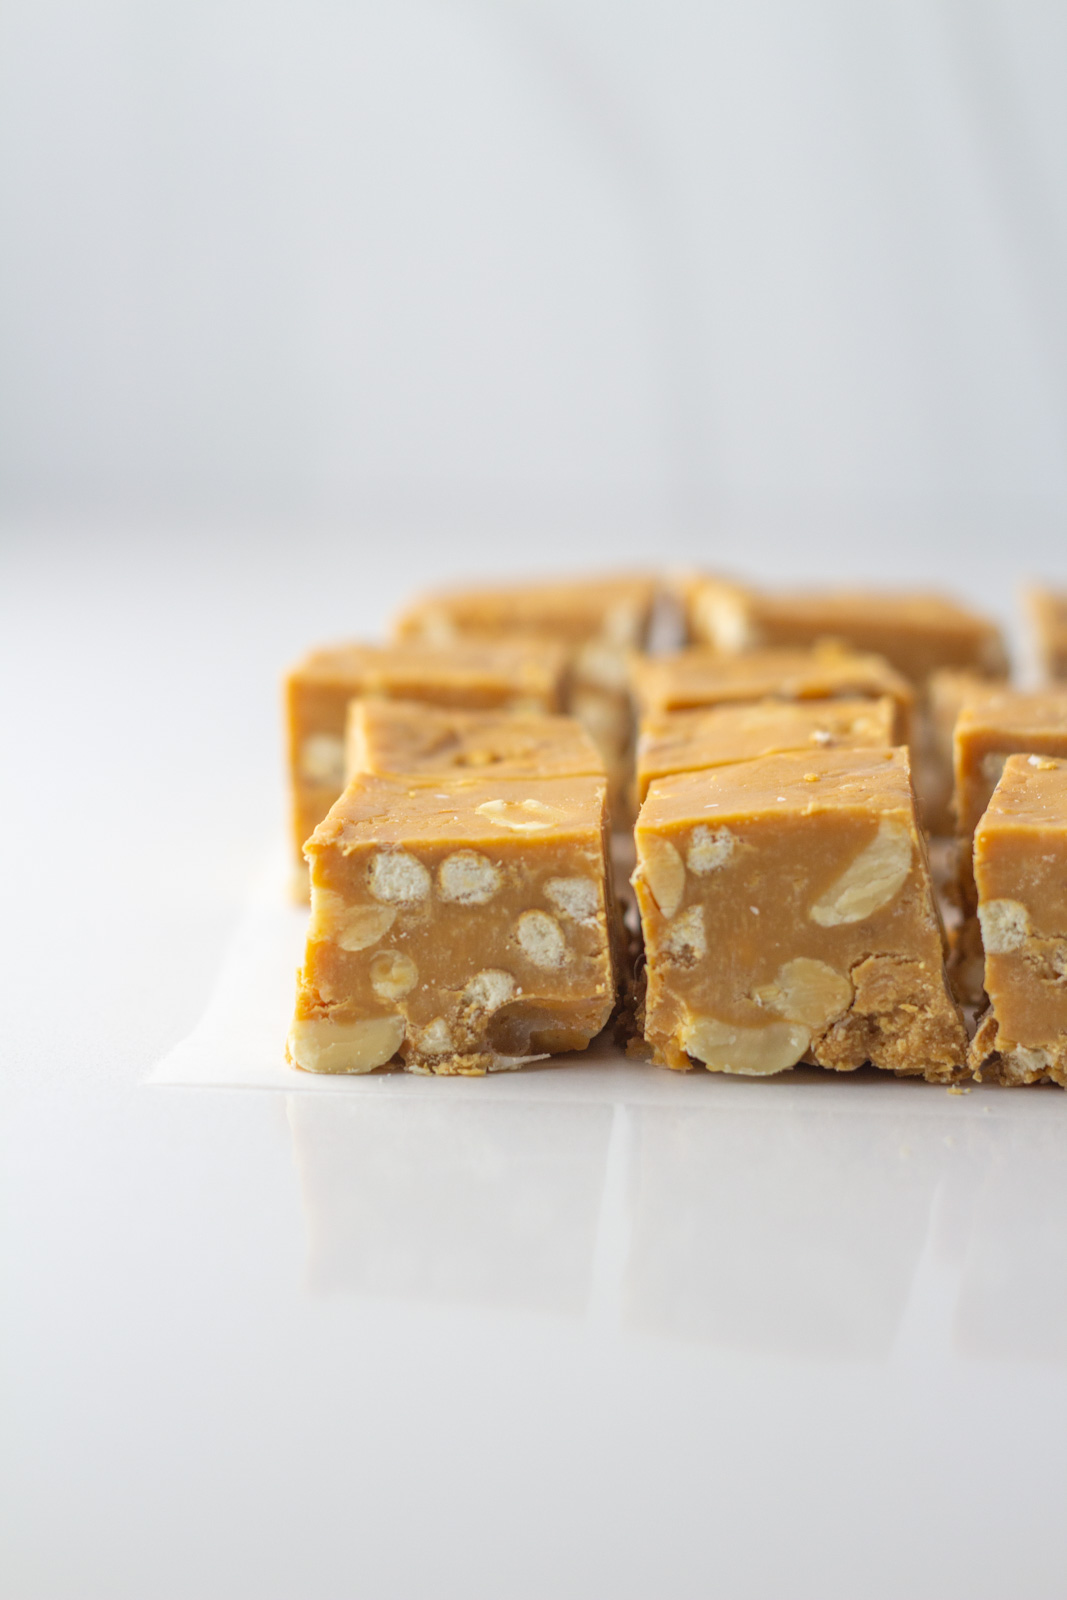 A side view of cubes of salted caramel fudge.